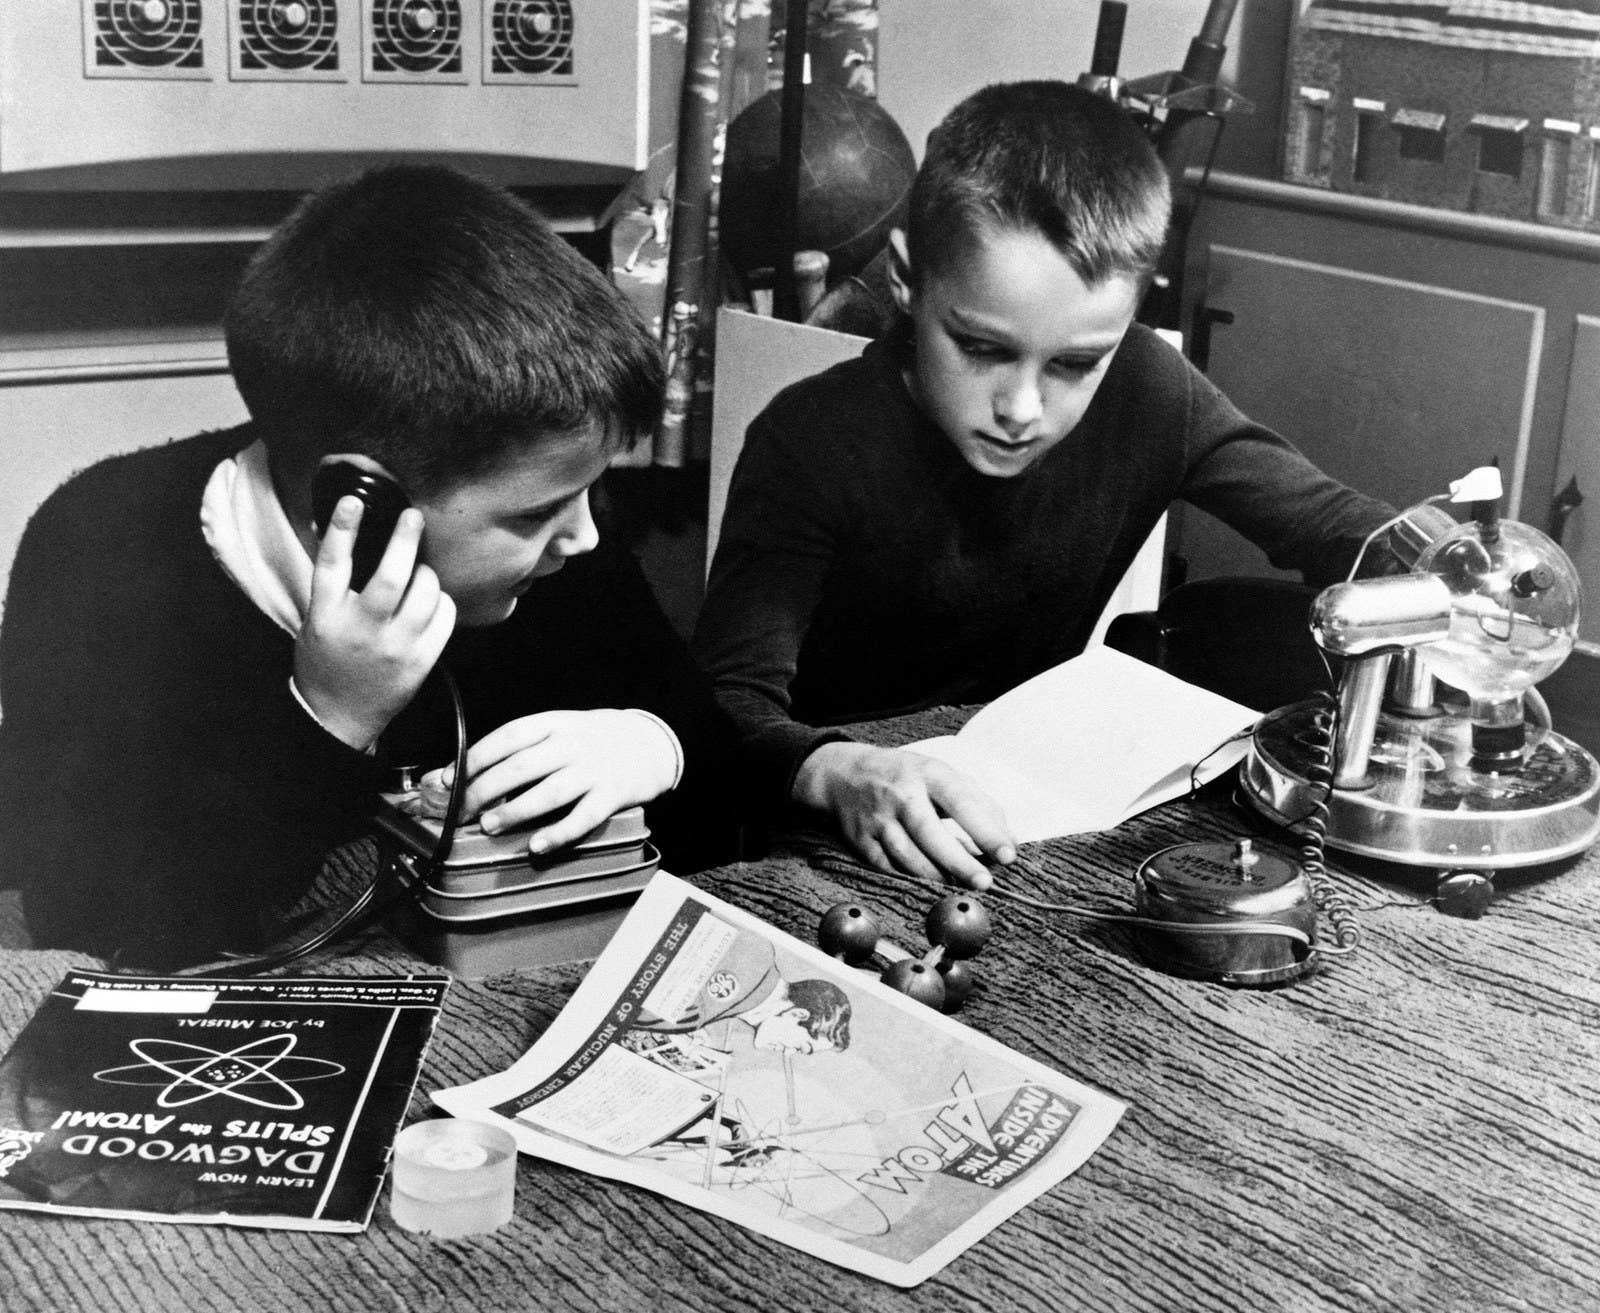 Two boys play with atomic-themed toys during the early 1960s.